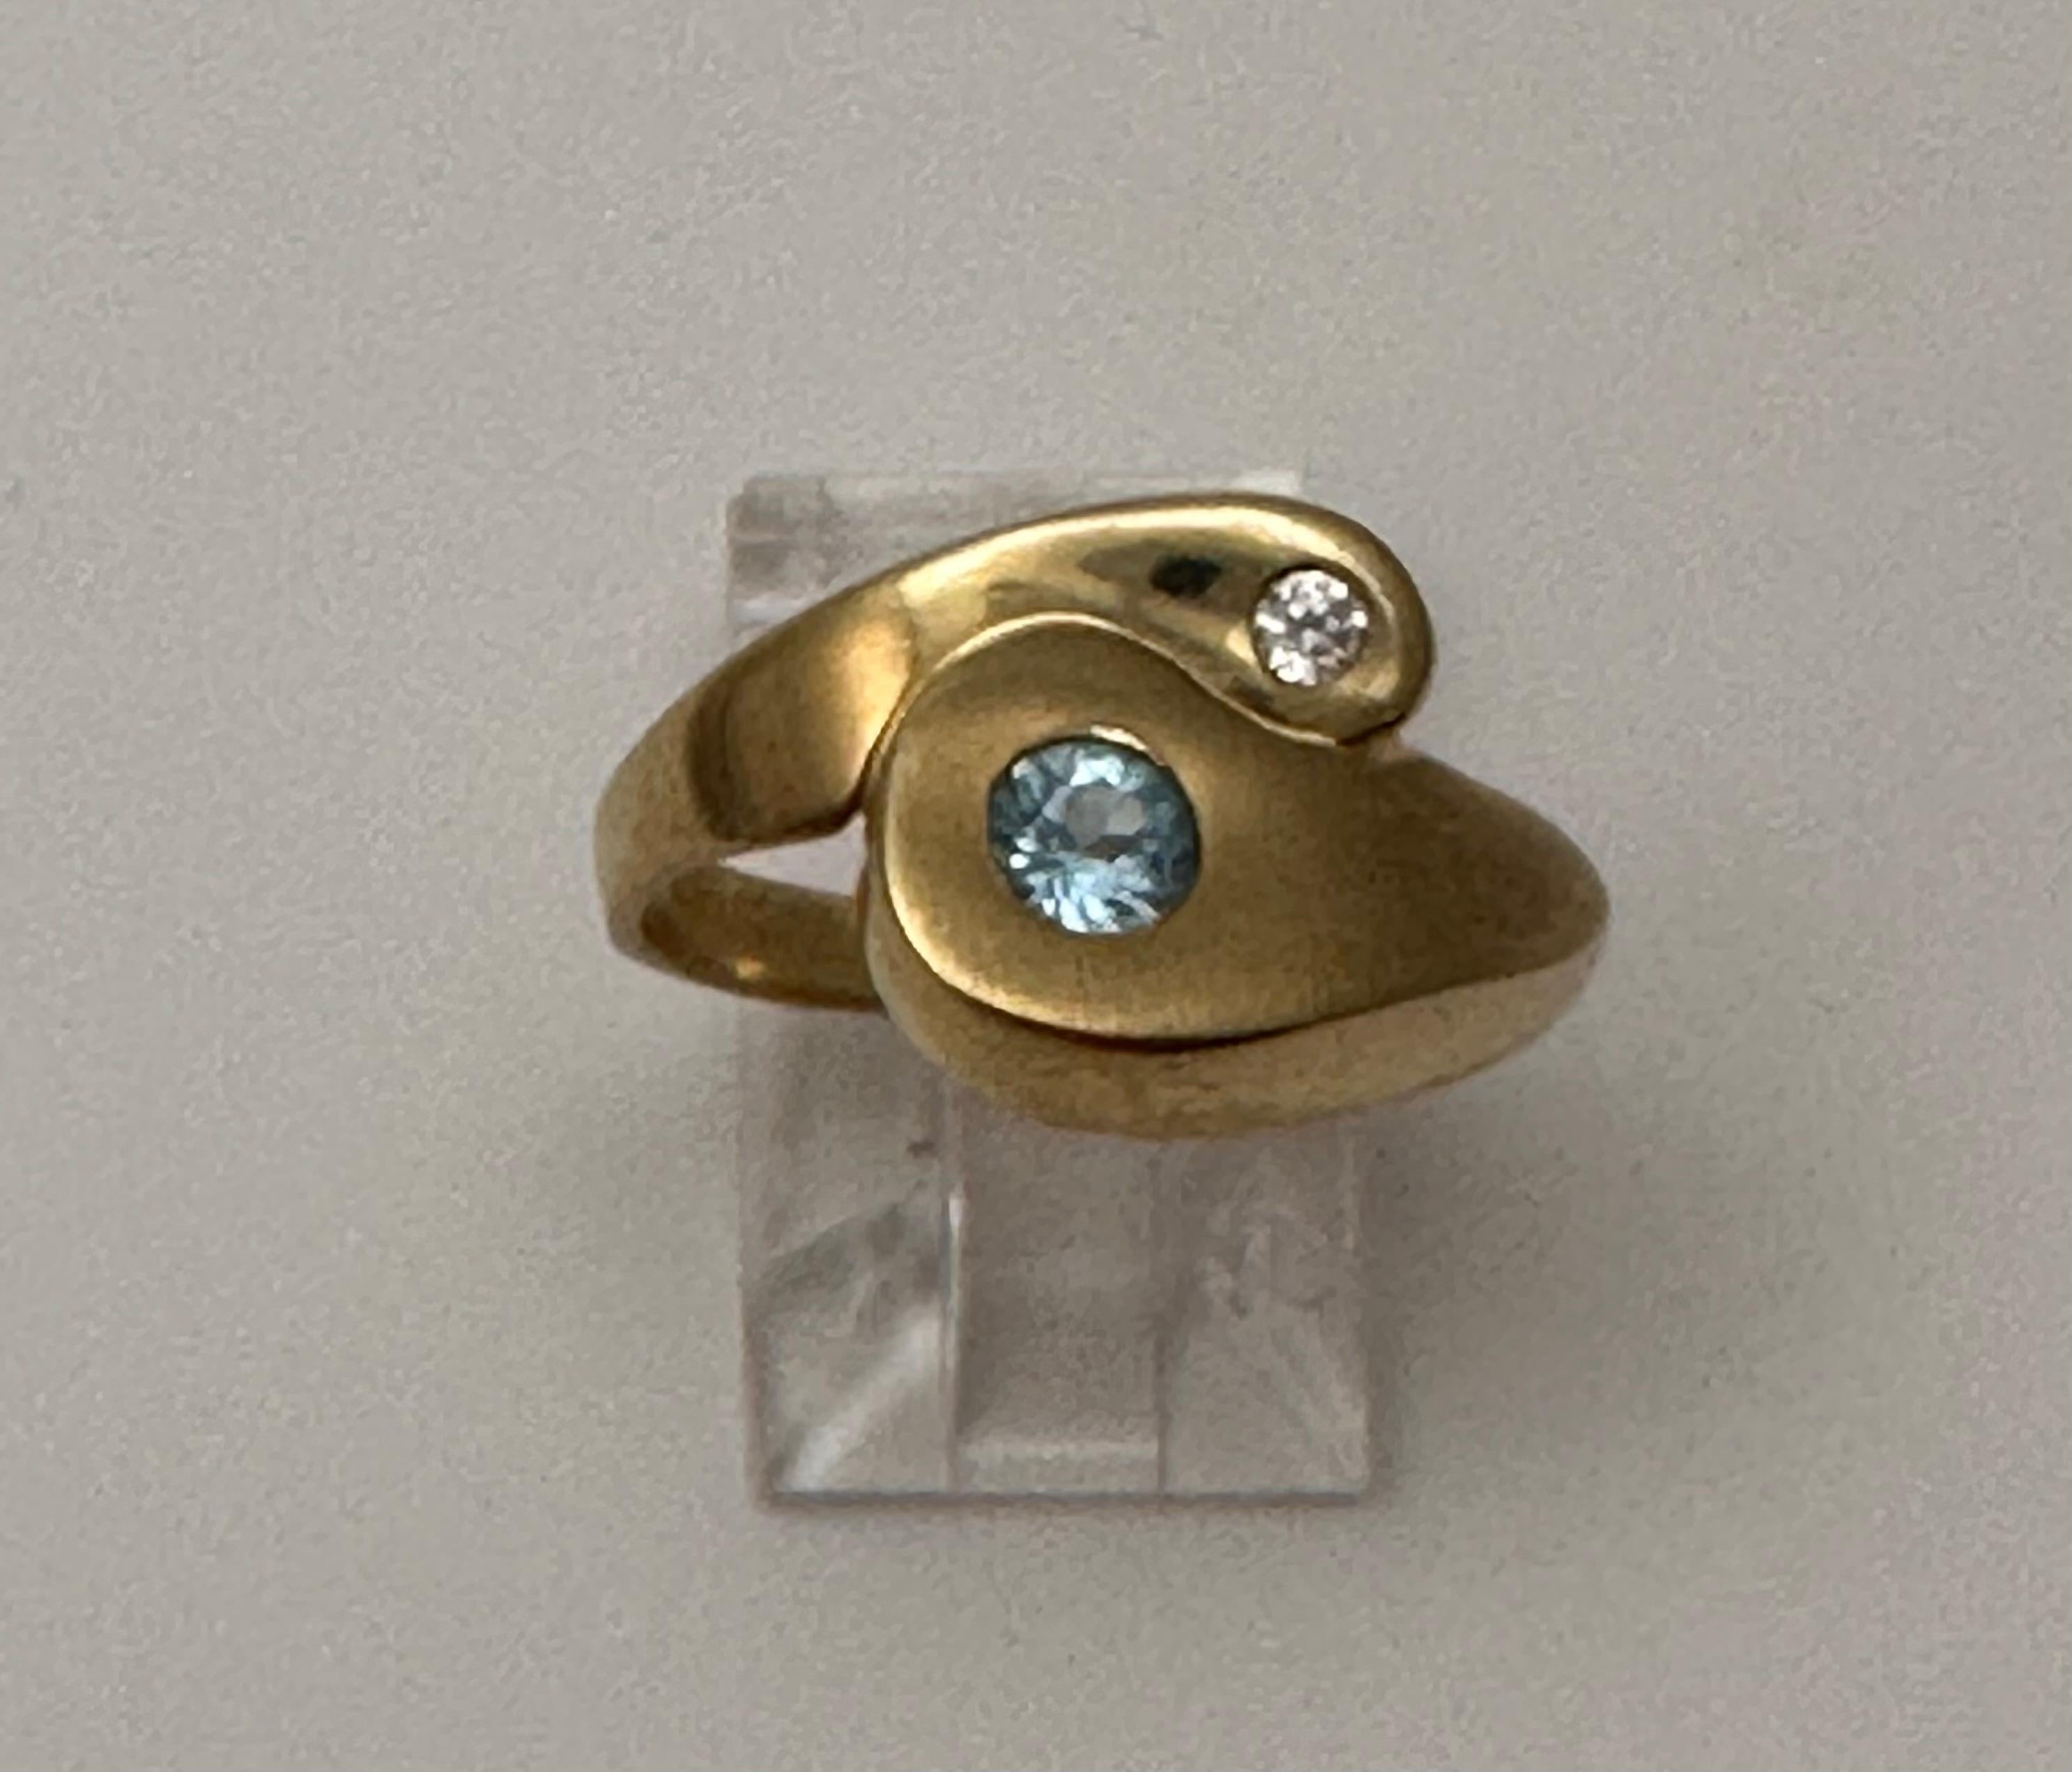 14k Yellow Gold approx. 4mm Round Blue Topaz and 2.2mm Round Diamond 
Ring Size 8

Blue Topaz Meaning
This vivacious blue gemstone is known as the stone of clarity. The Blue Topaz meaning allows you to channel your inner wisdom and find the perfect